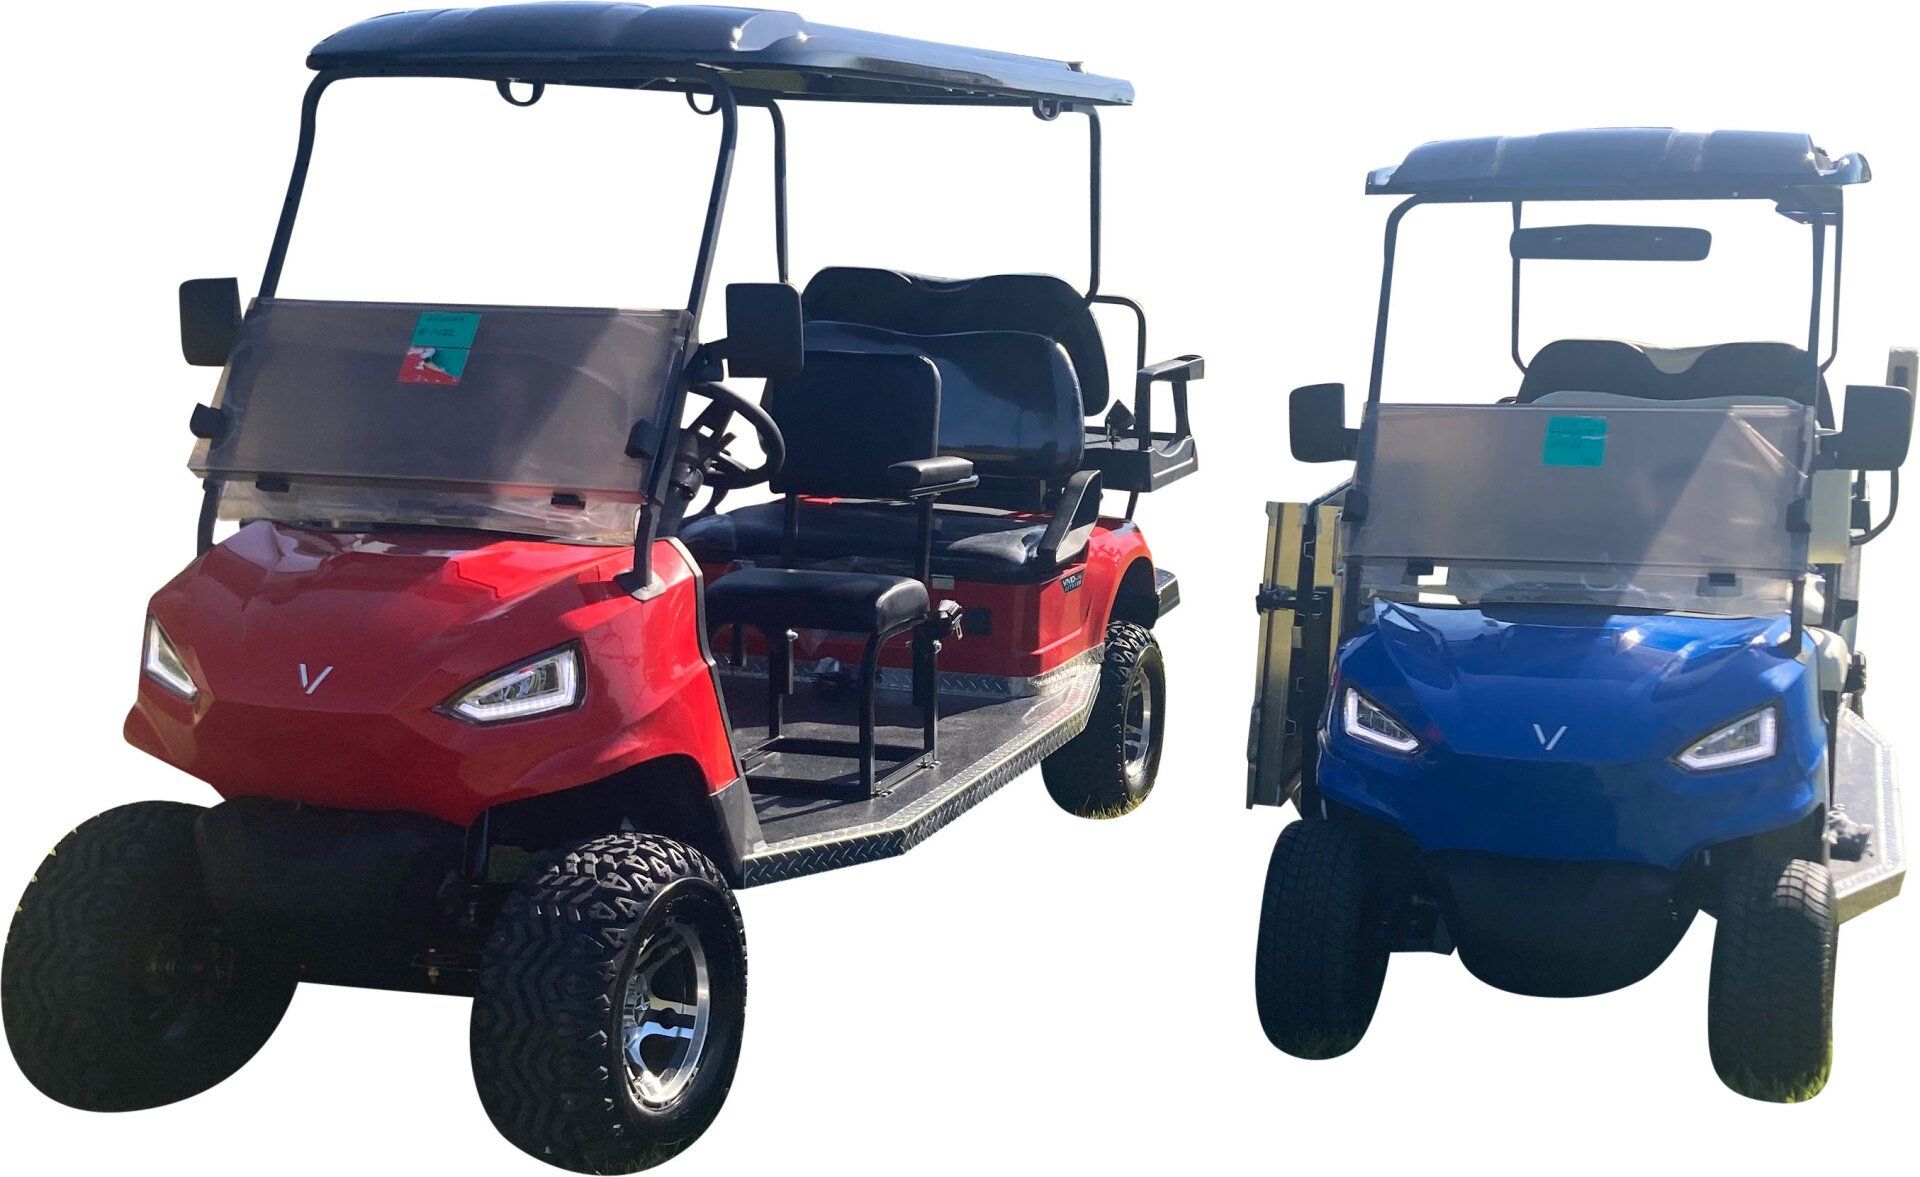 Two wheelchair golf carts from PHED Mobility - red and blue